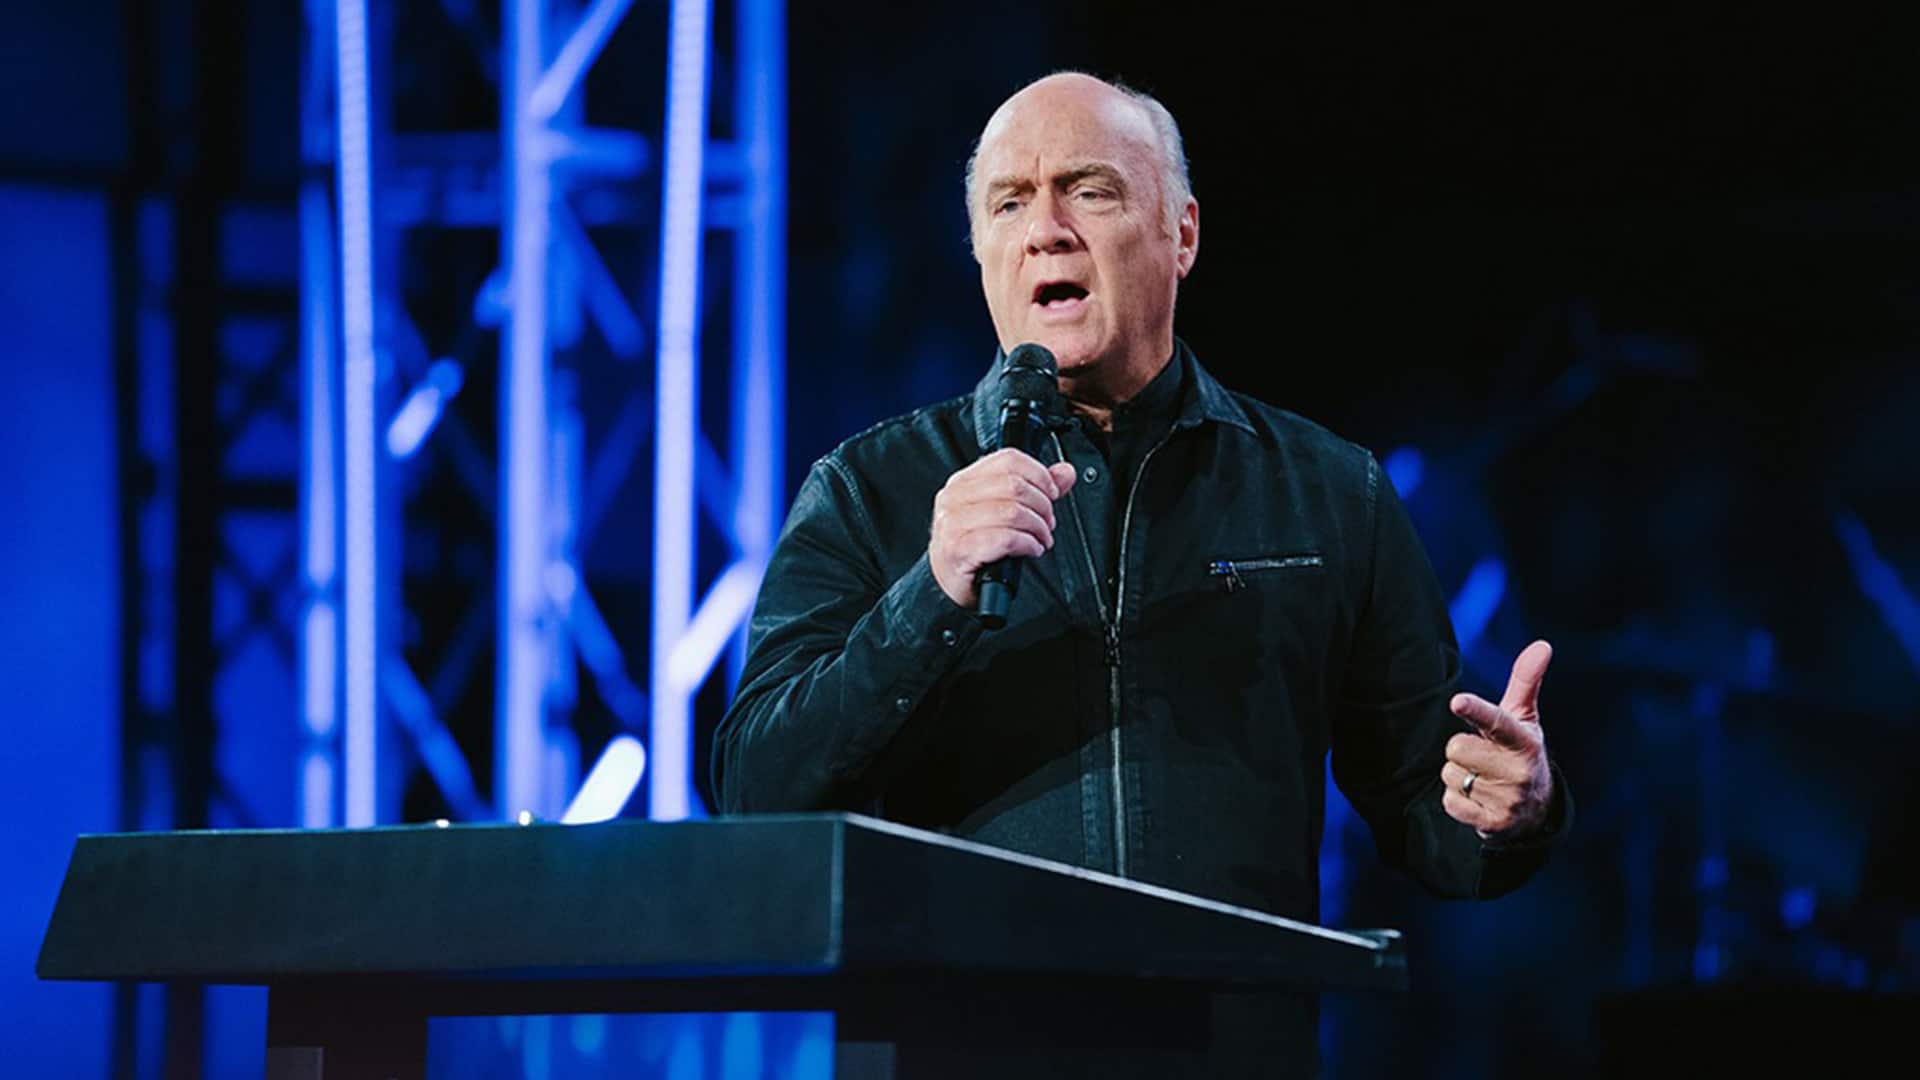 Greg Laurie on stage preaching All Things